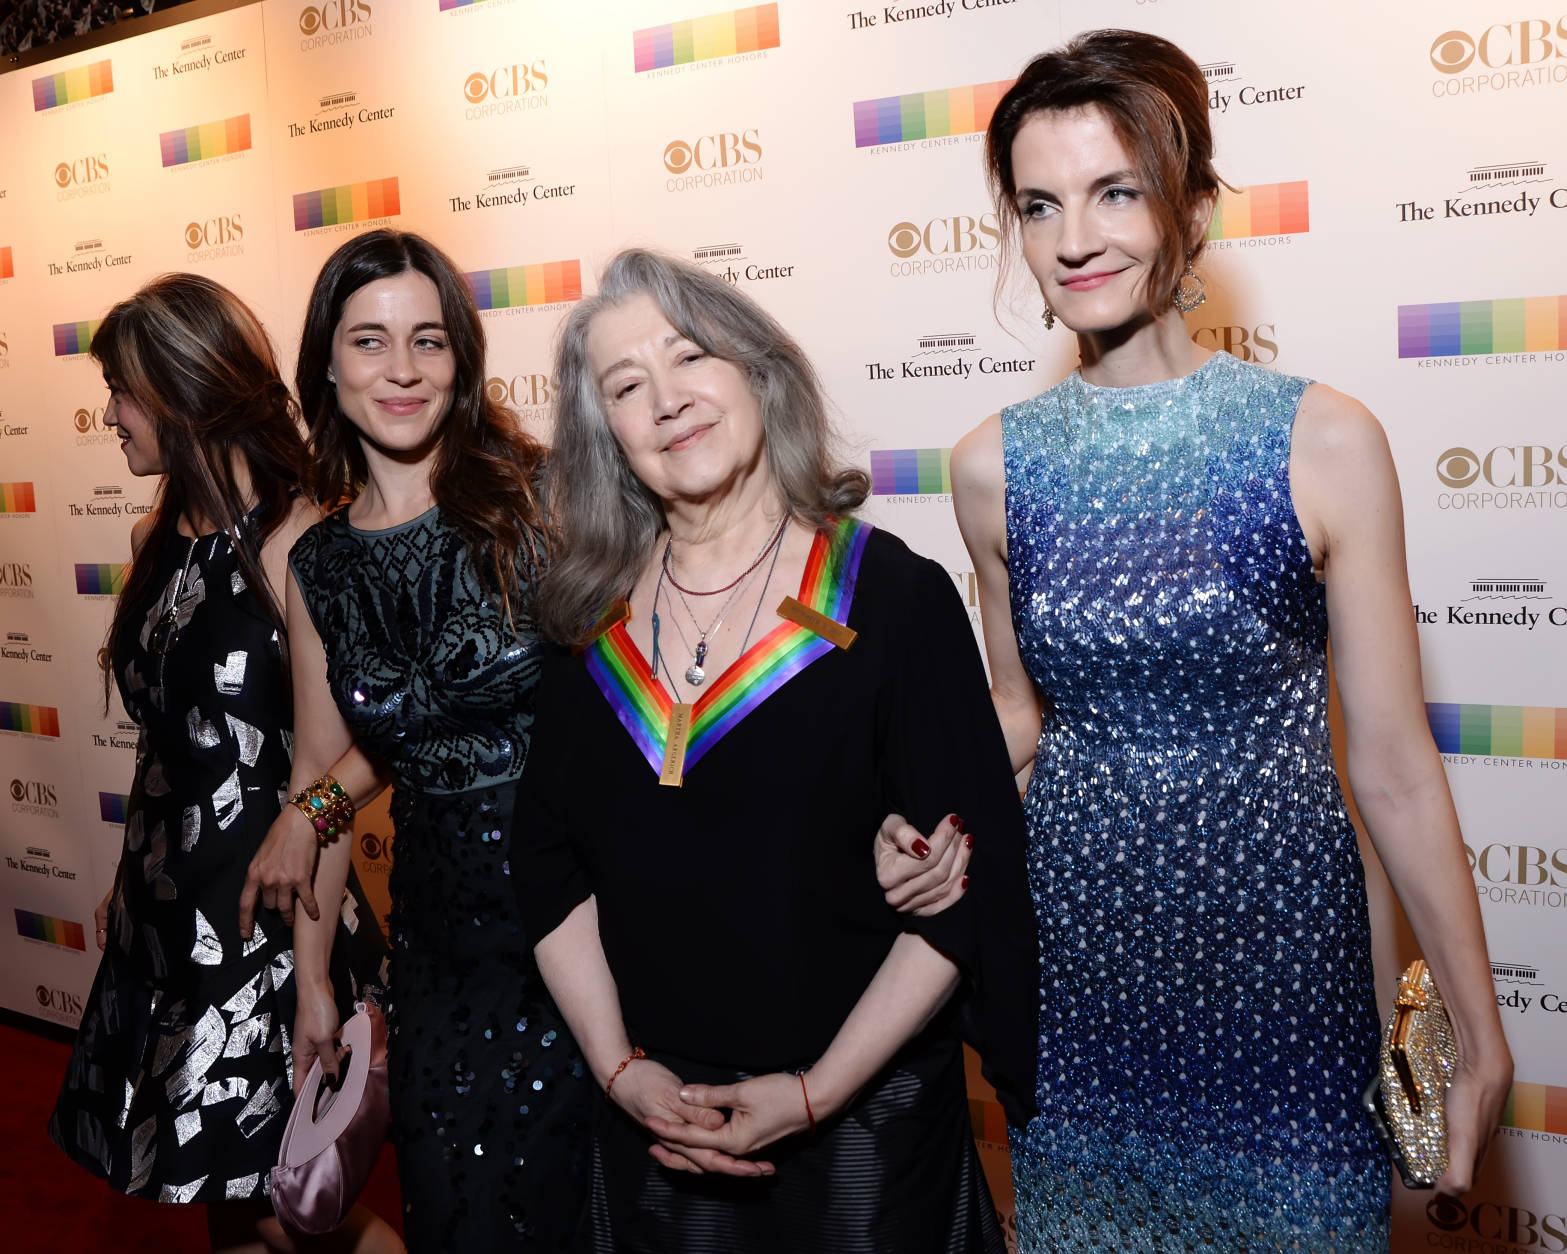 2016 Kennedy Center Honoree, Argentine pianist Martha Argerich, with her daughters. (Courtesy Shannon Finney, <a href="http://www.shannonfinneyphotography.com">www.shannonfinneyphotography.com</a>)